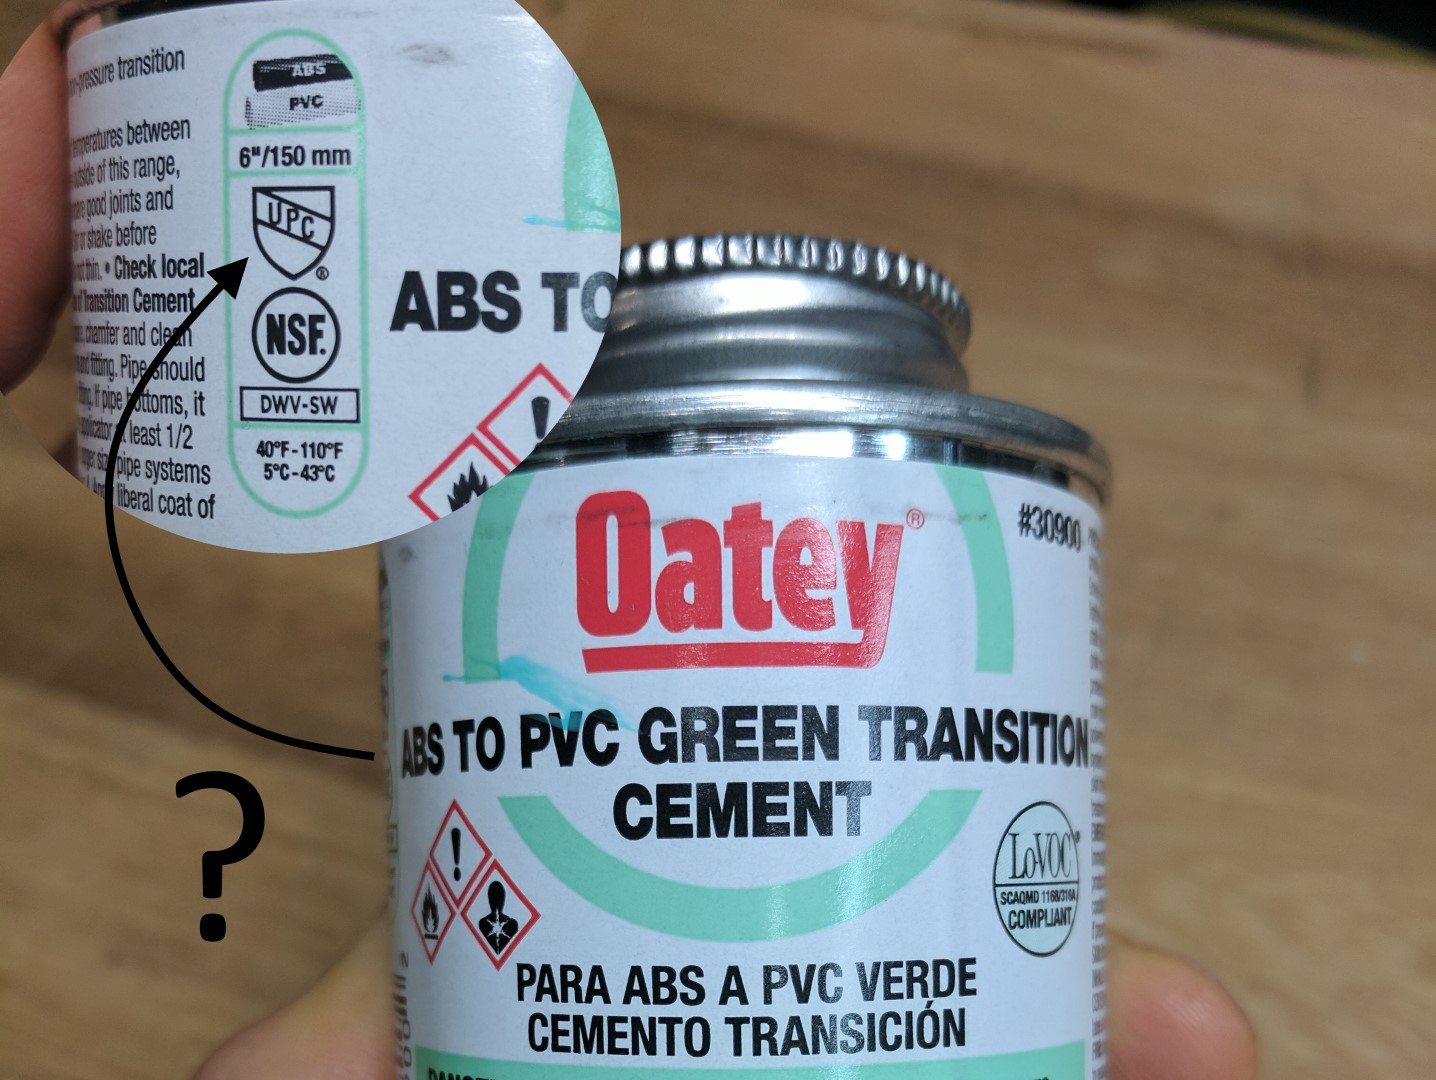 ABS to PVC cement